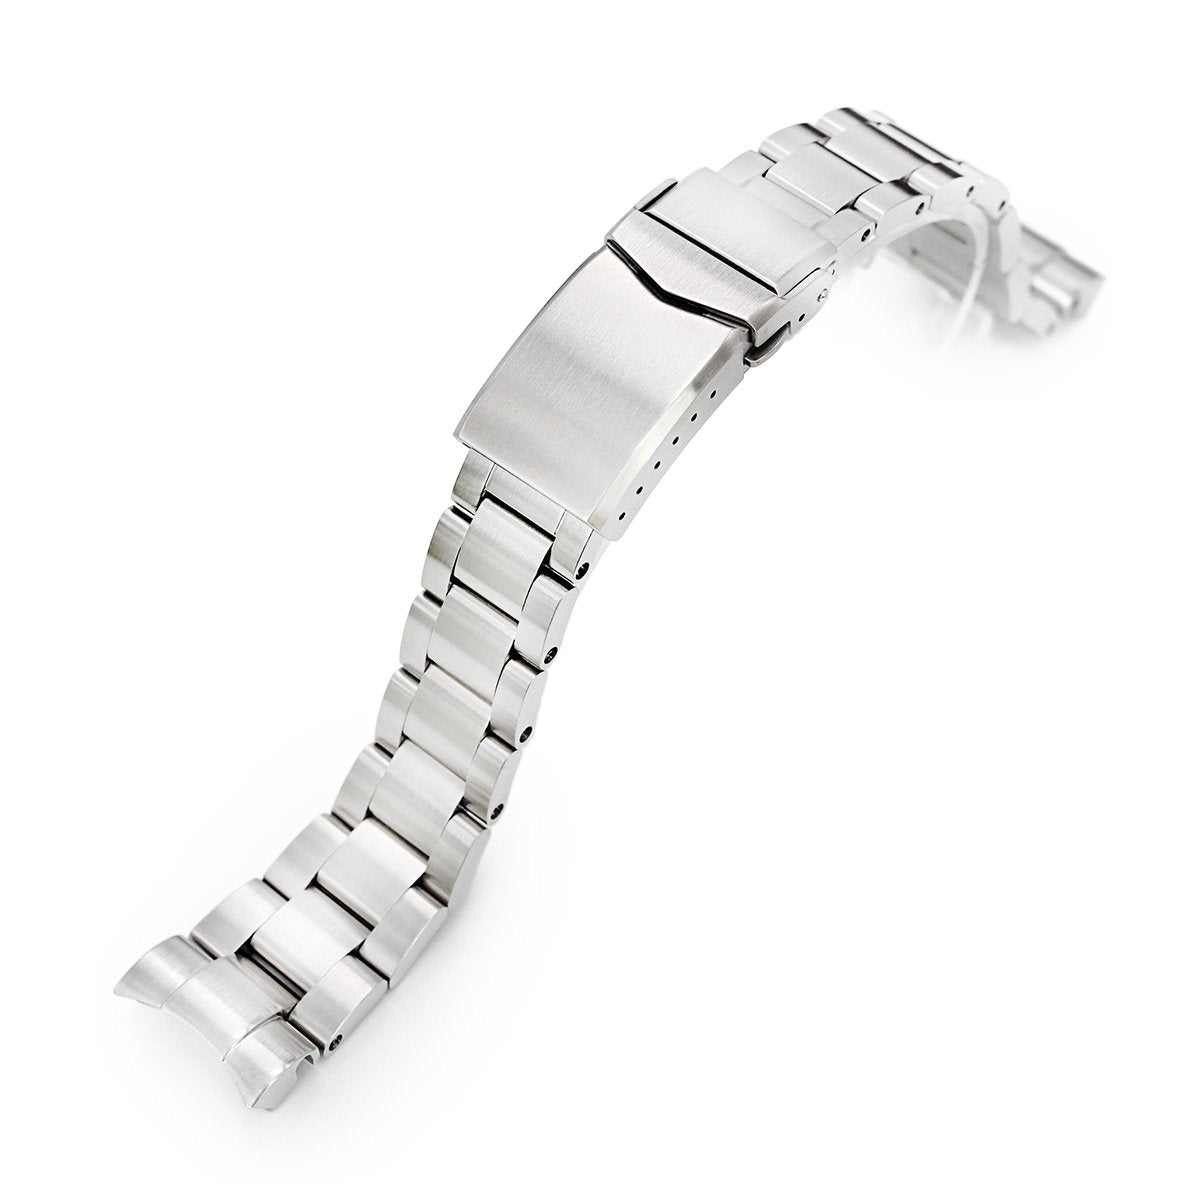 Beyond the Vintage Super Boyer Watch Bracelet for RX SUB 1680 in Brushed V-Clasp Strapcode Watch Bands